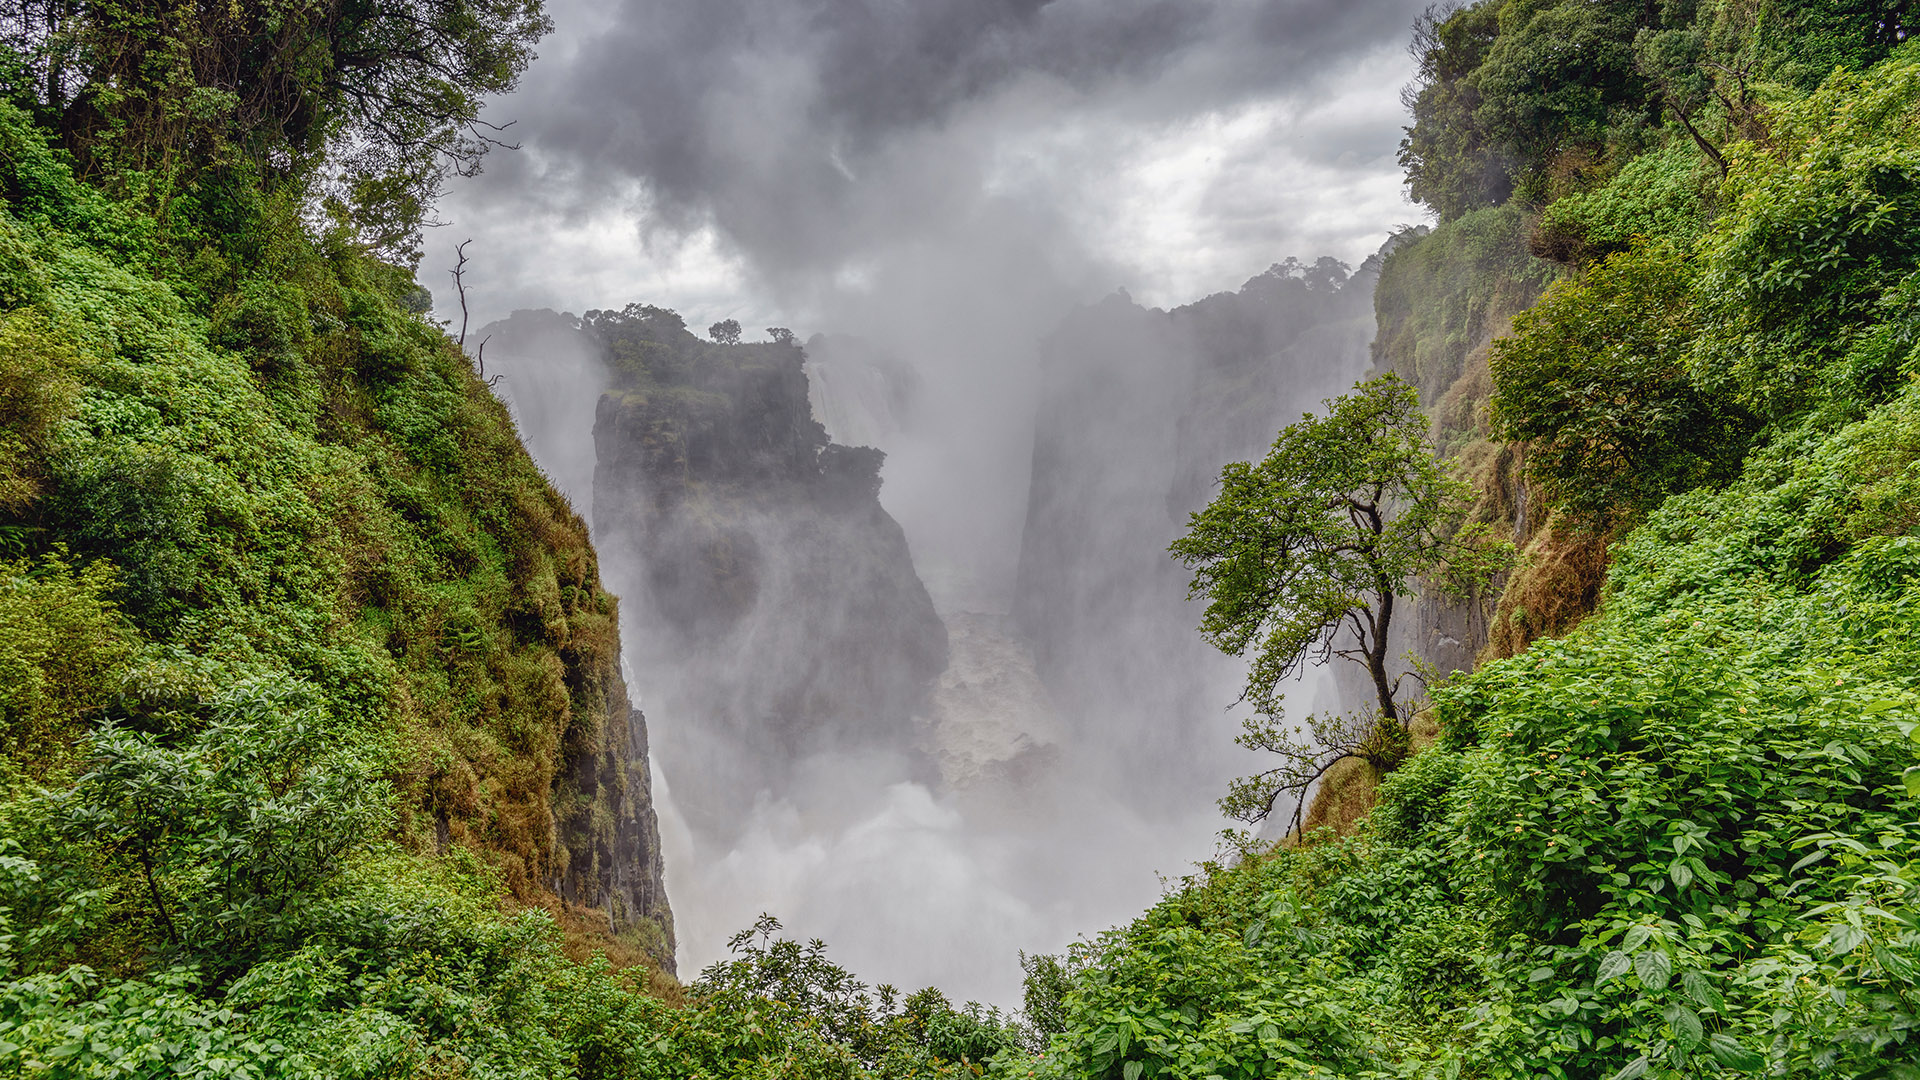 General 1920x1080 trees forest mountains valley clouds Victoria Falls Zambia